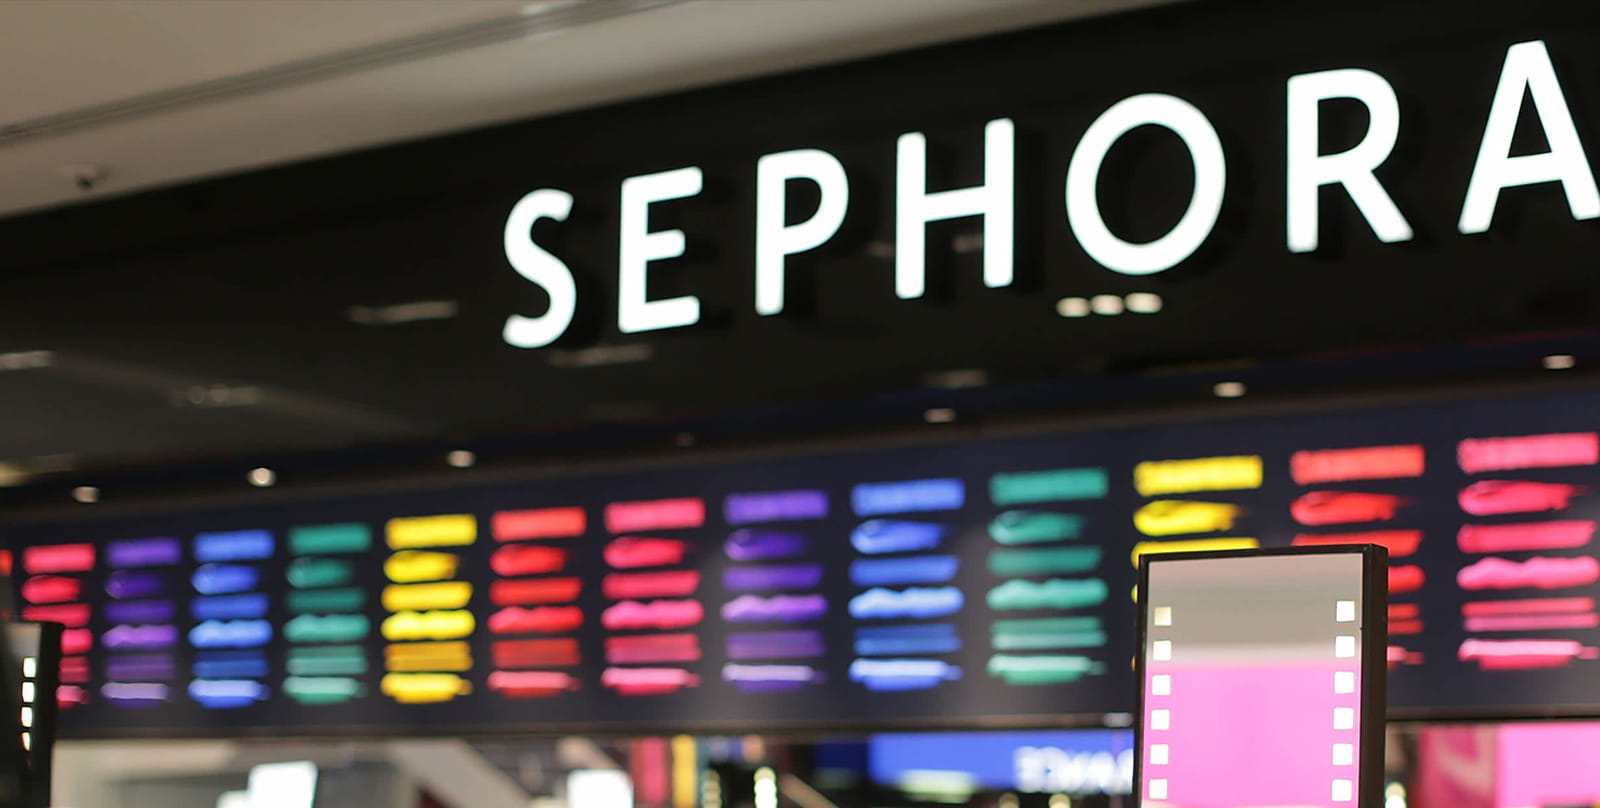 Sephora signage in a store